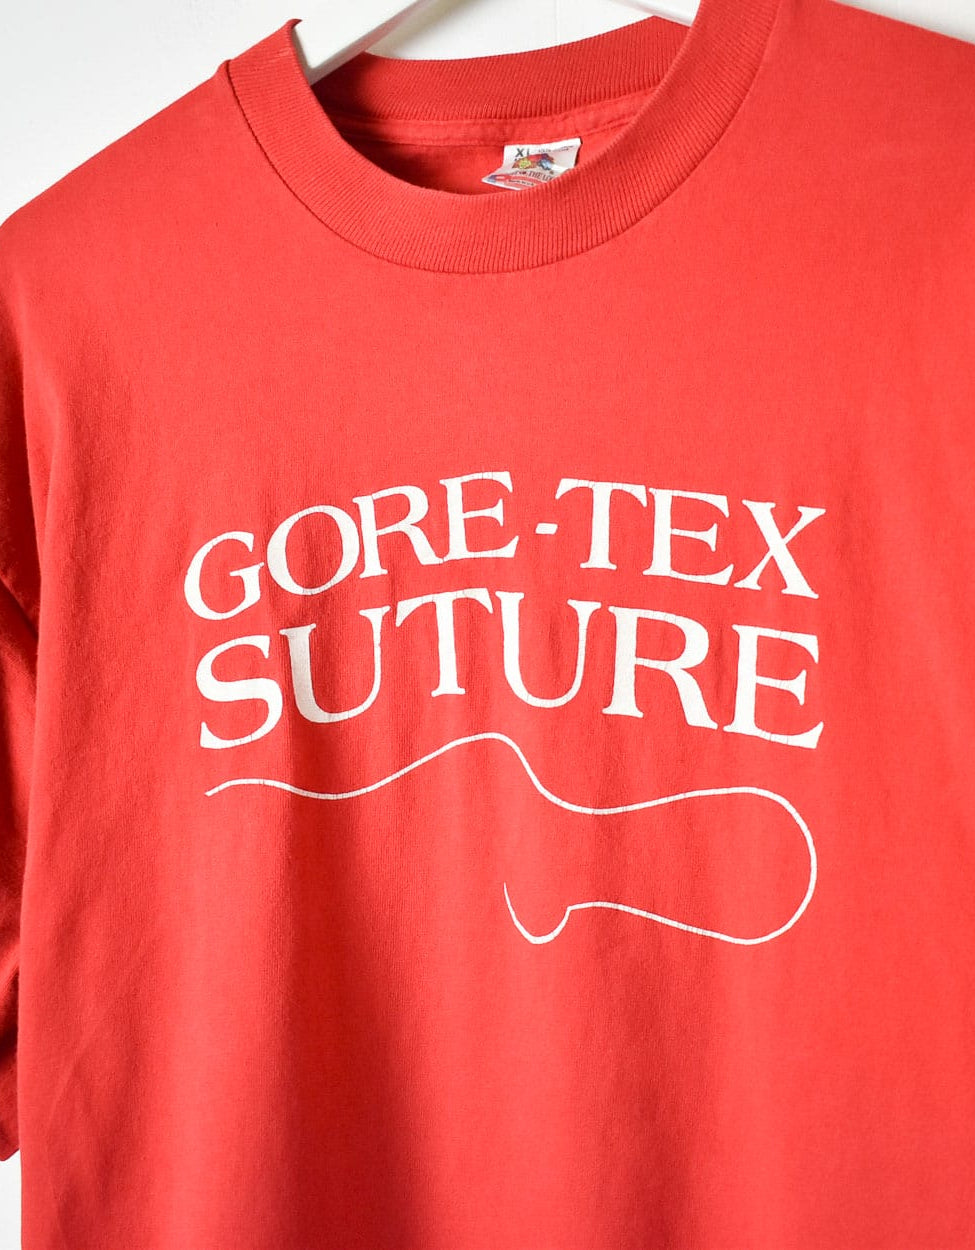 Red Gore Tex Suture Single Stitch T-Shirt - X-Large